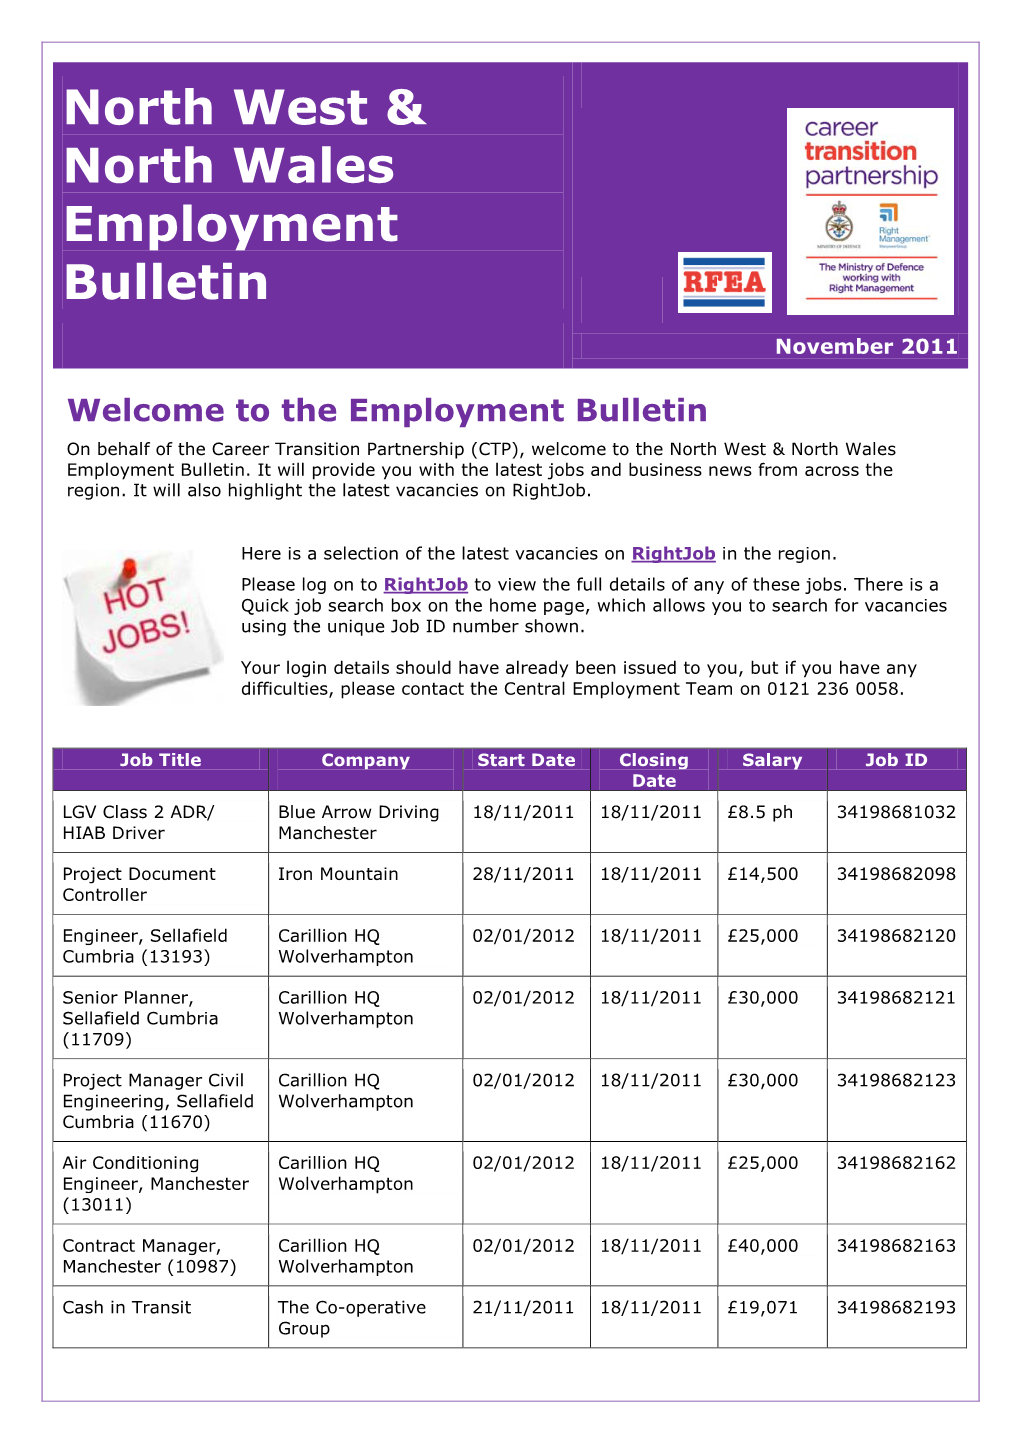 North West & North Wales Employment Bulletin